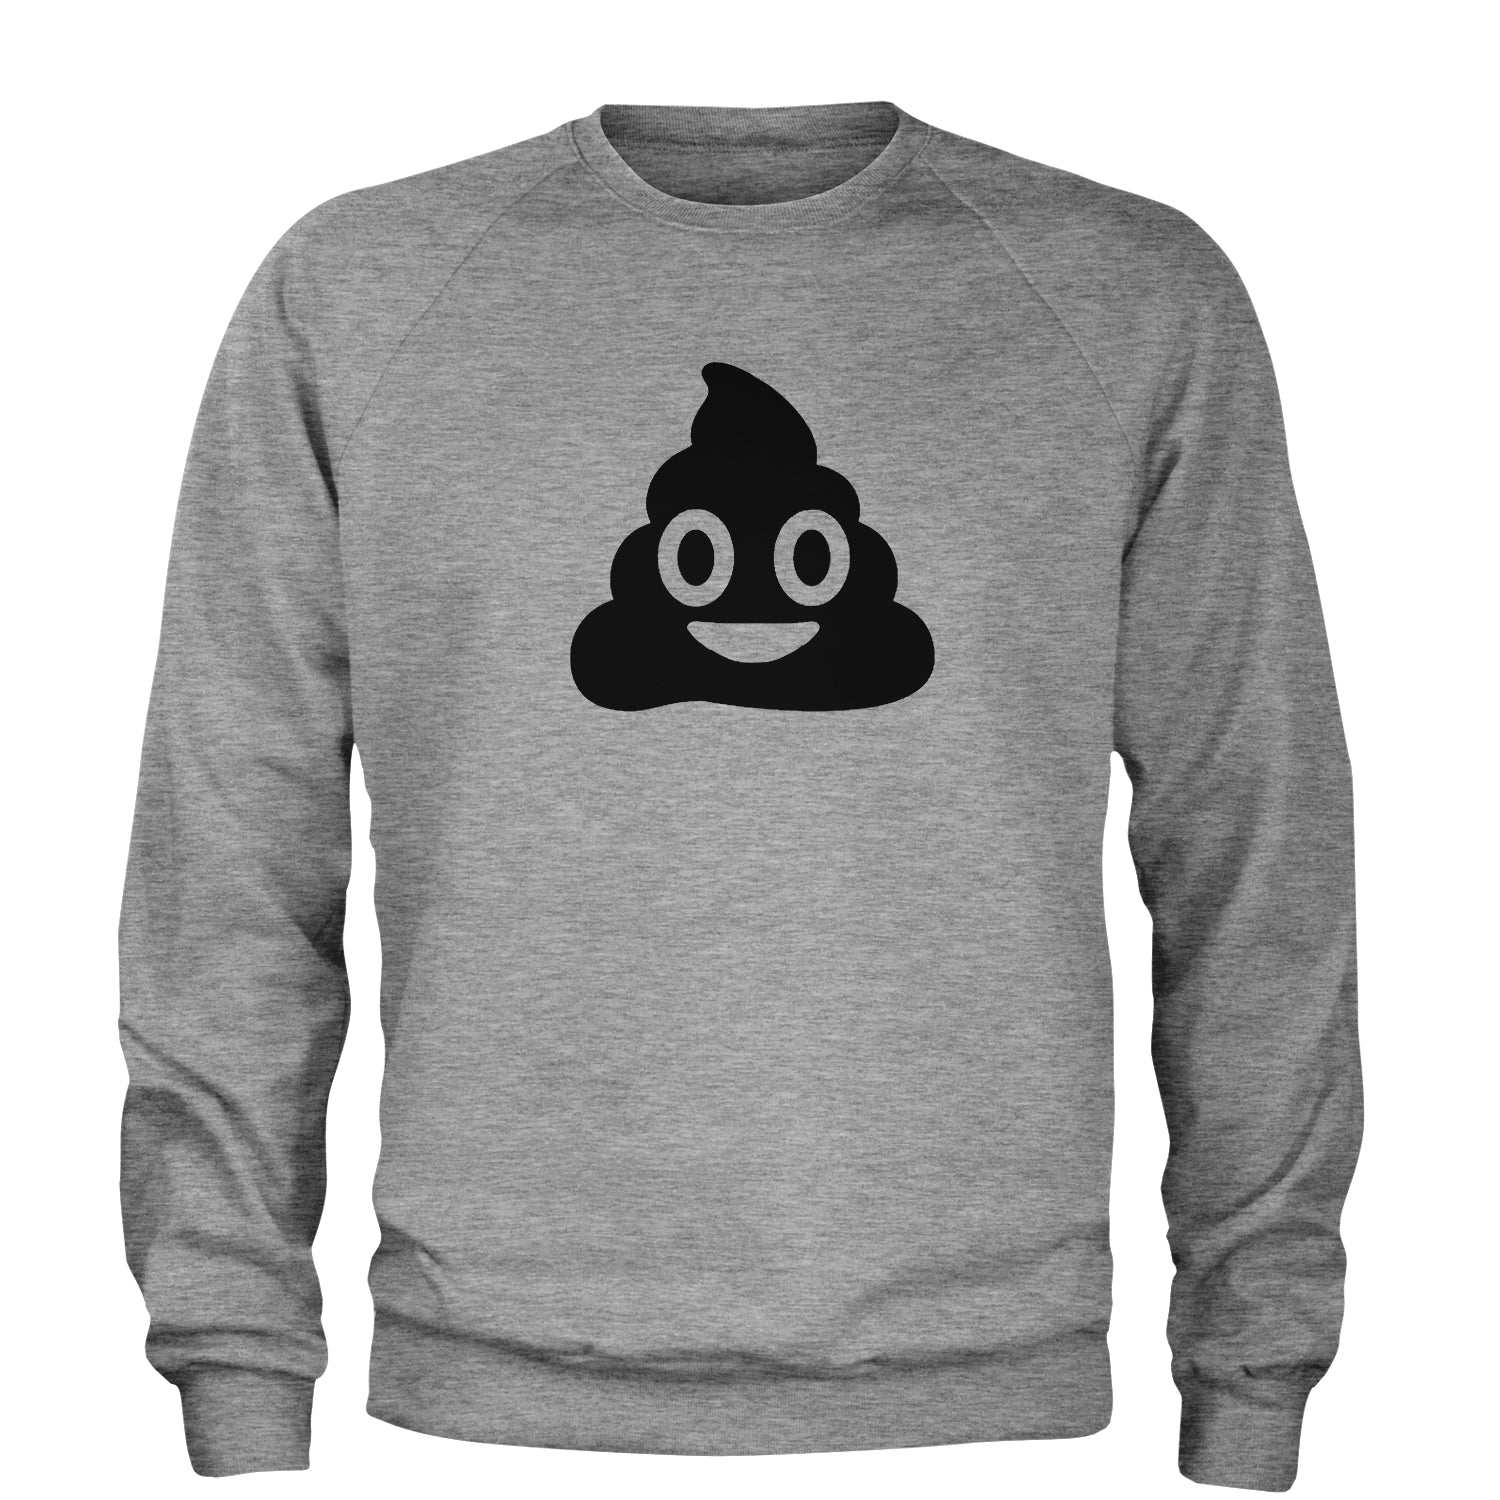 Emoticon Poop Face Smile Face Adult Crewneck Sweatshirt cosplay, costume, dress, emoji, emote, face, halloween, smiley, up, yellow by Expression Tees